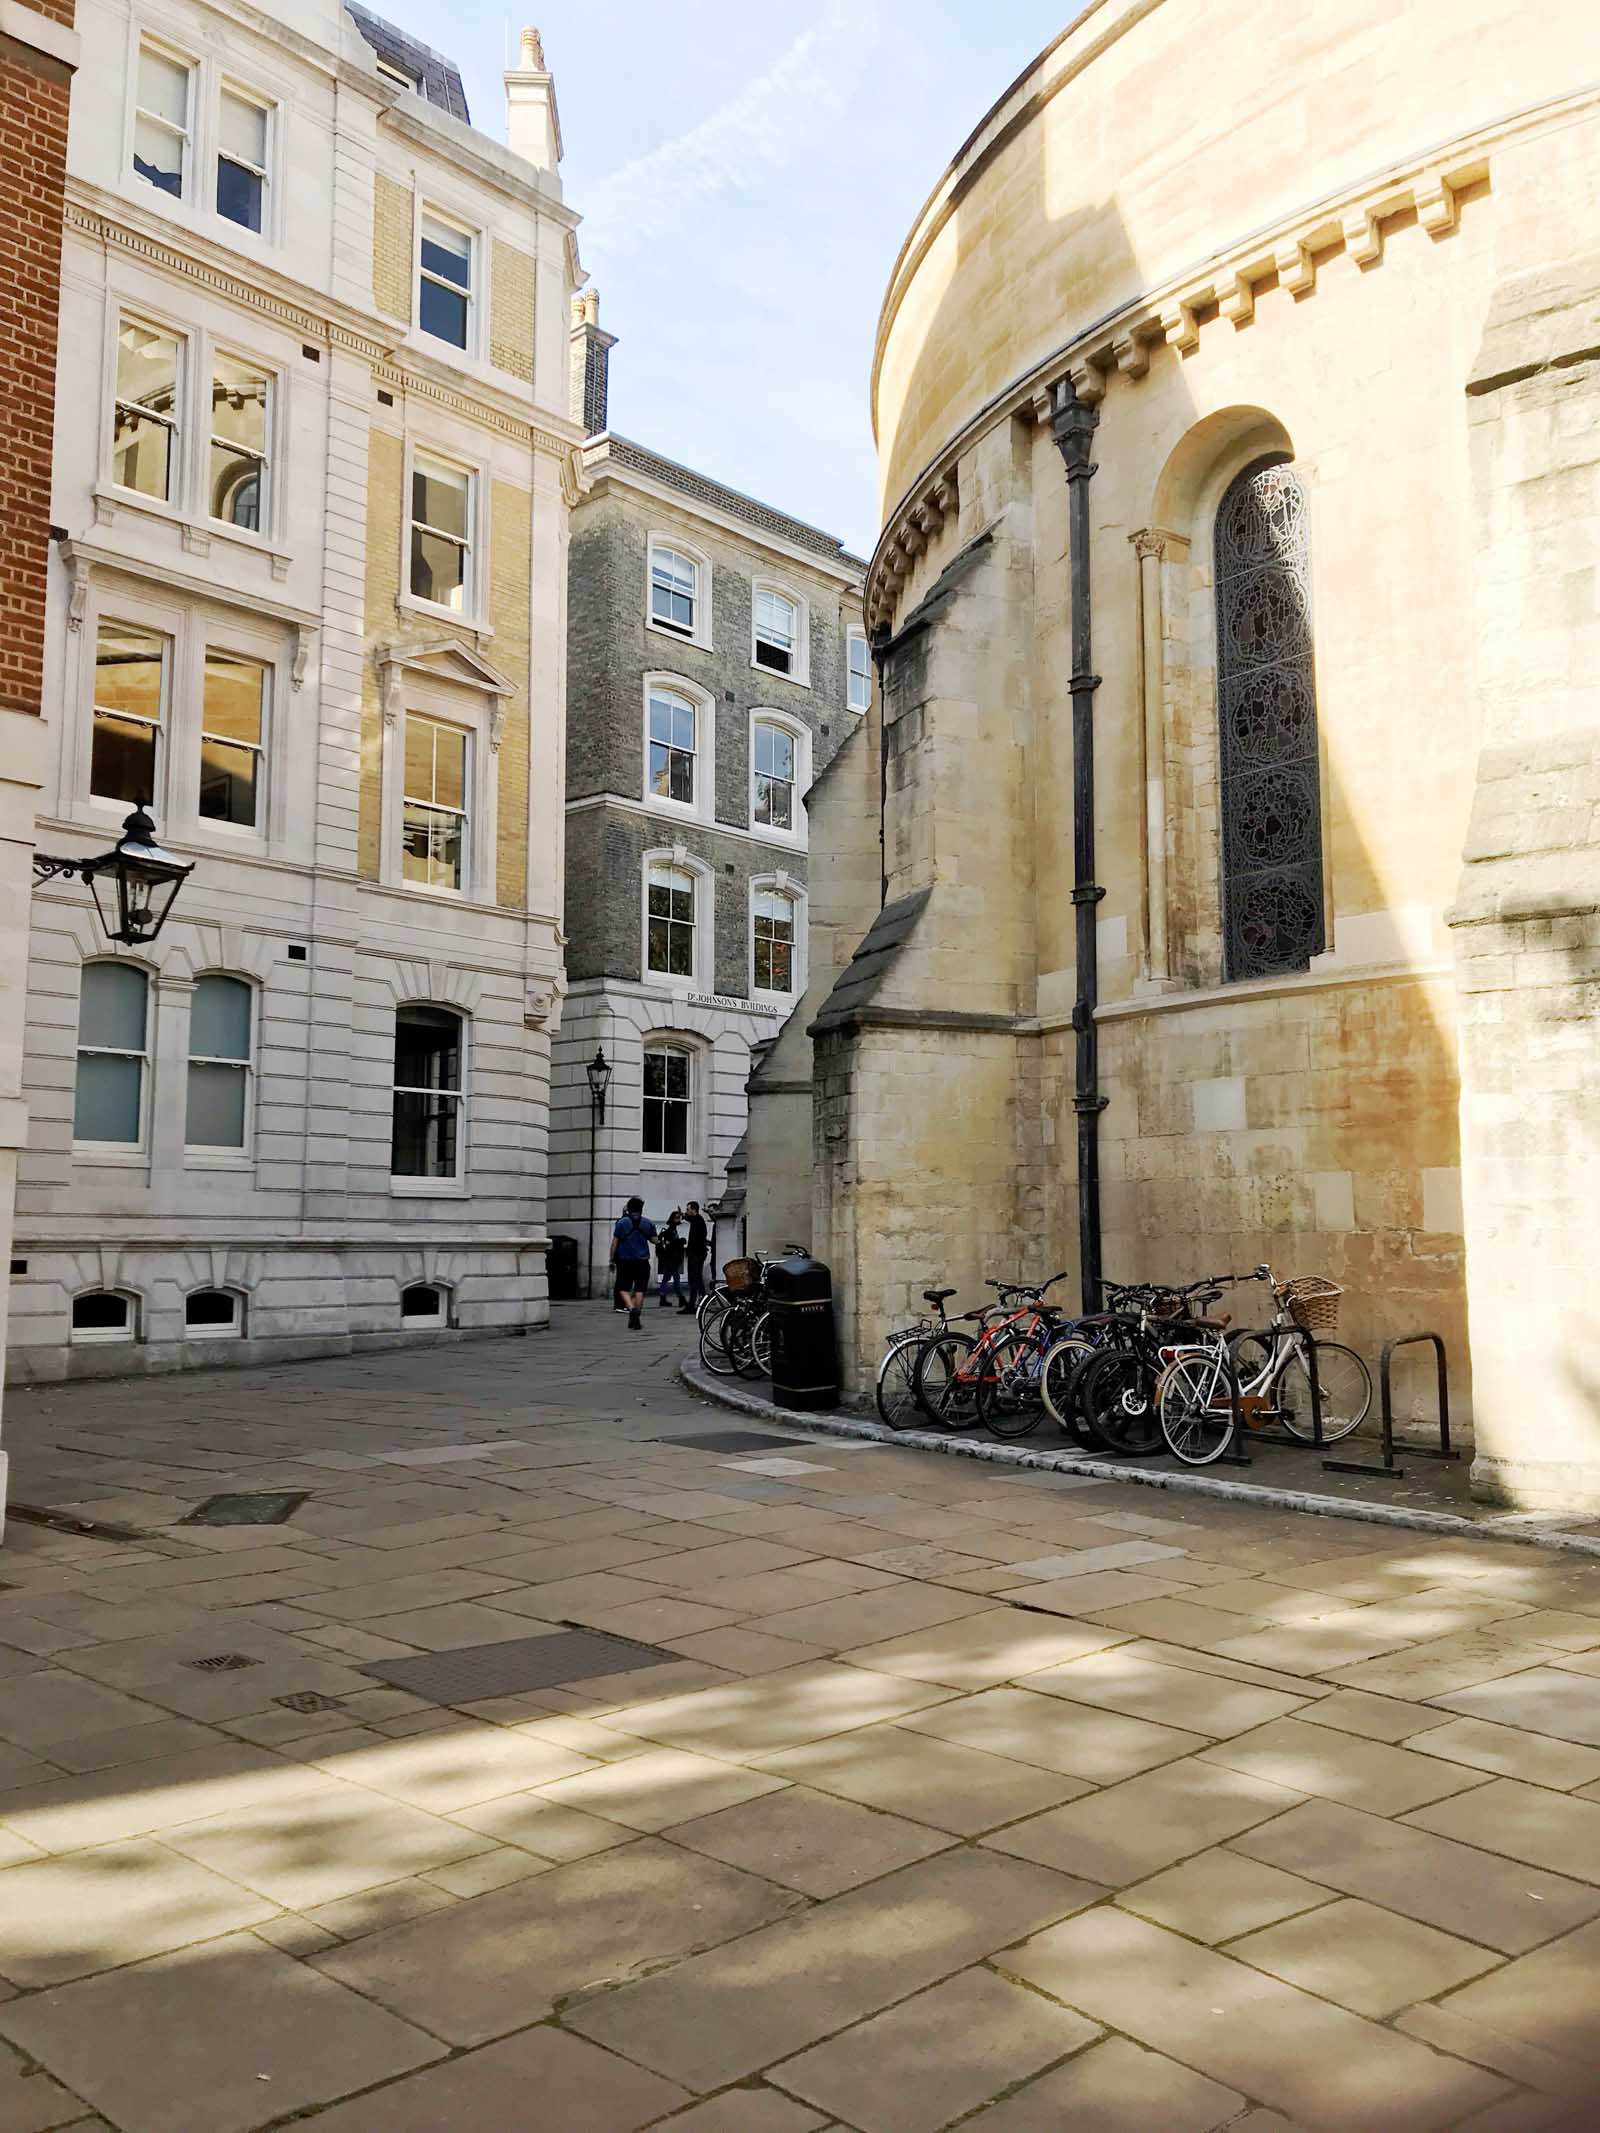 Temple Church, Things to do in London